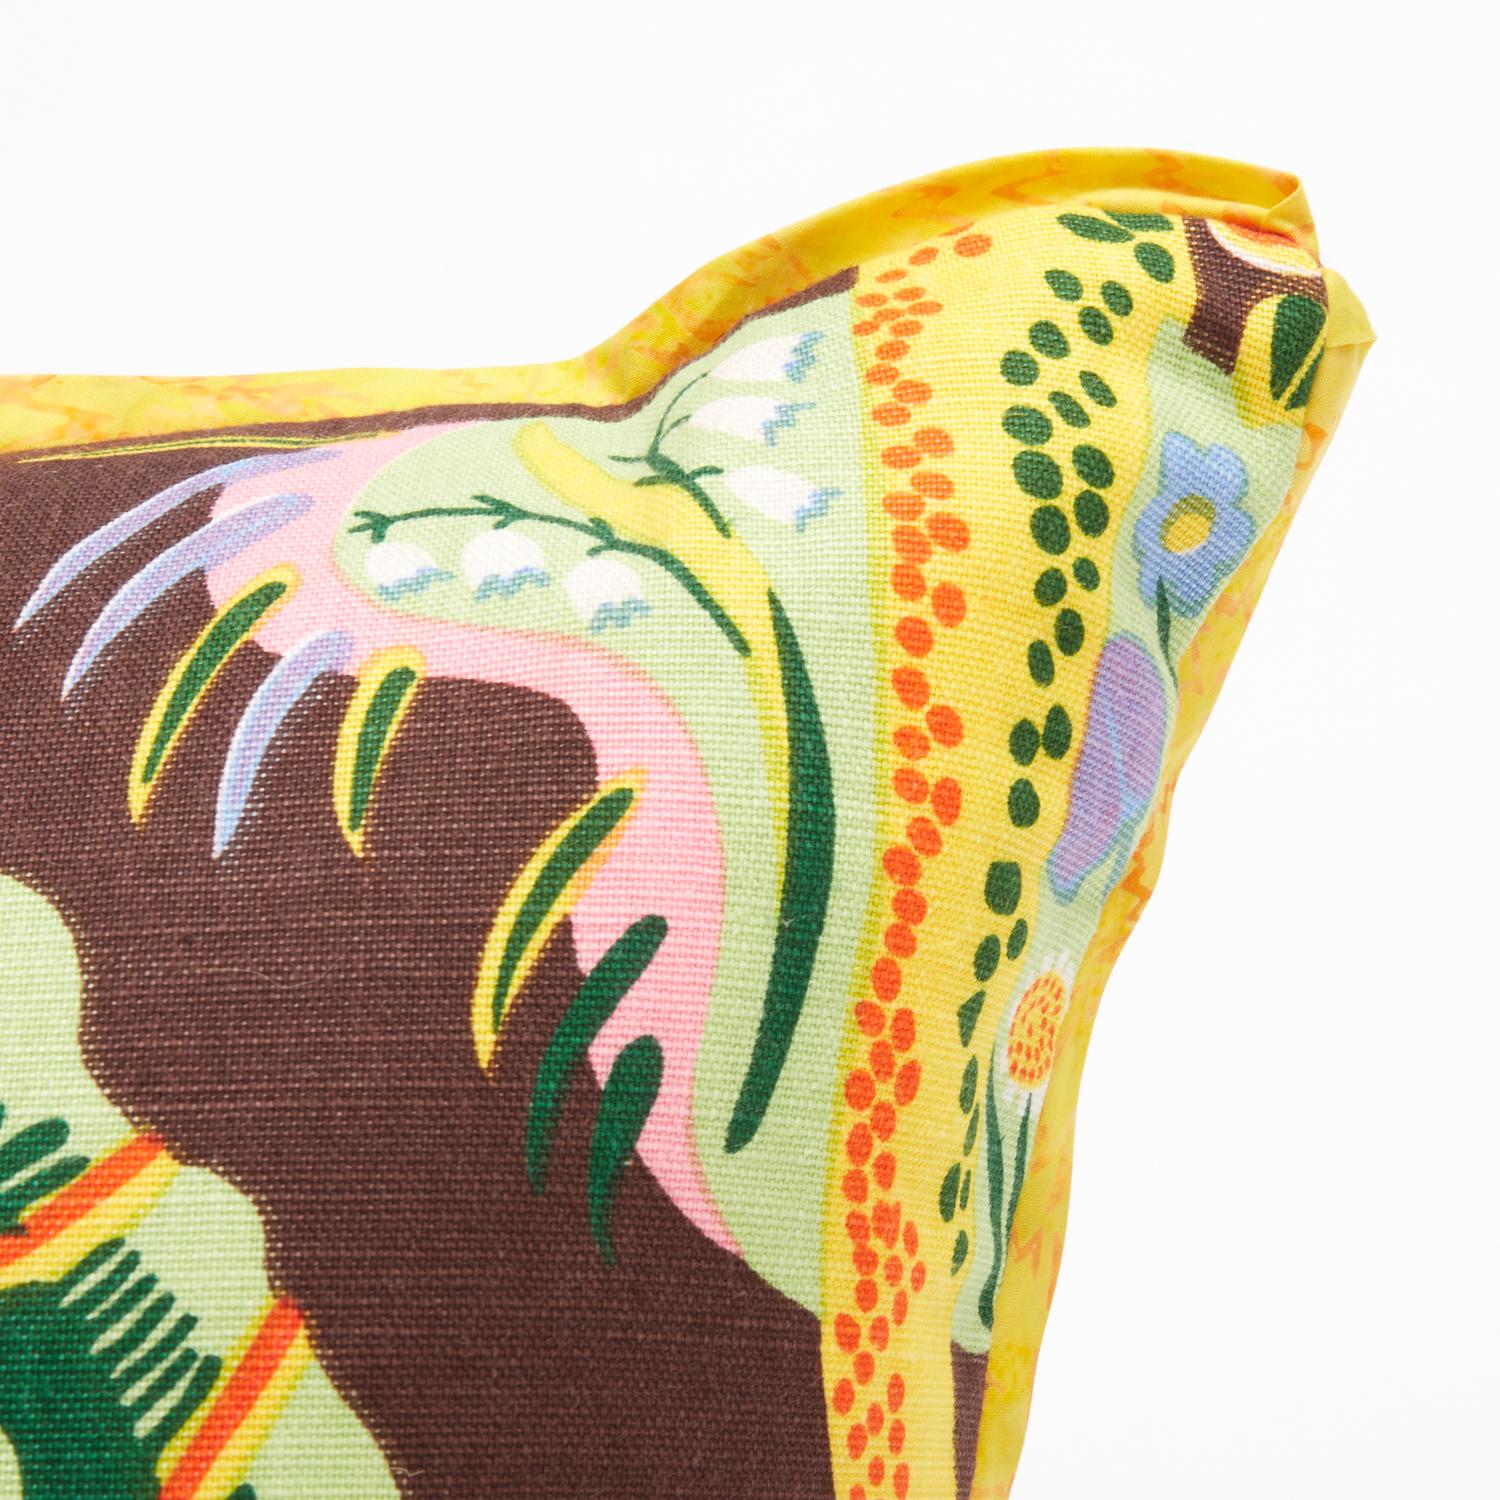 Set of Four Josef Frank Cushions in the 